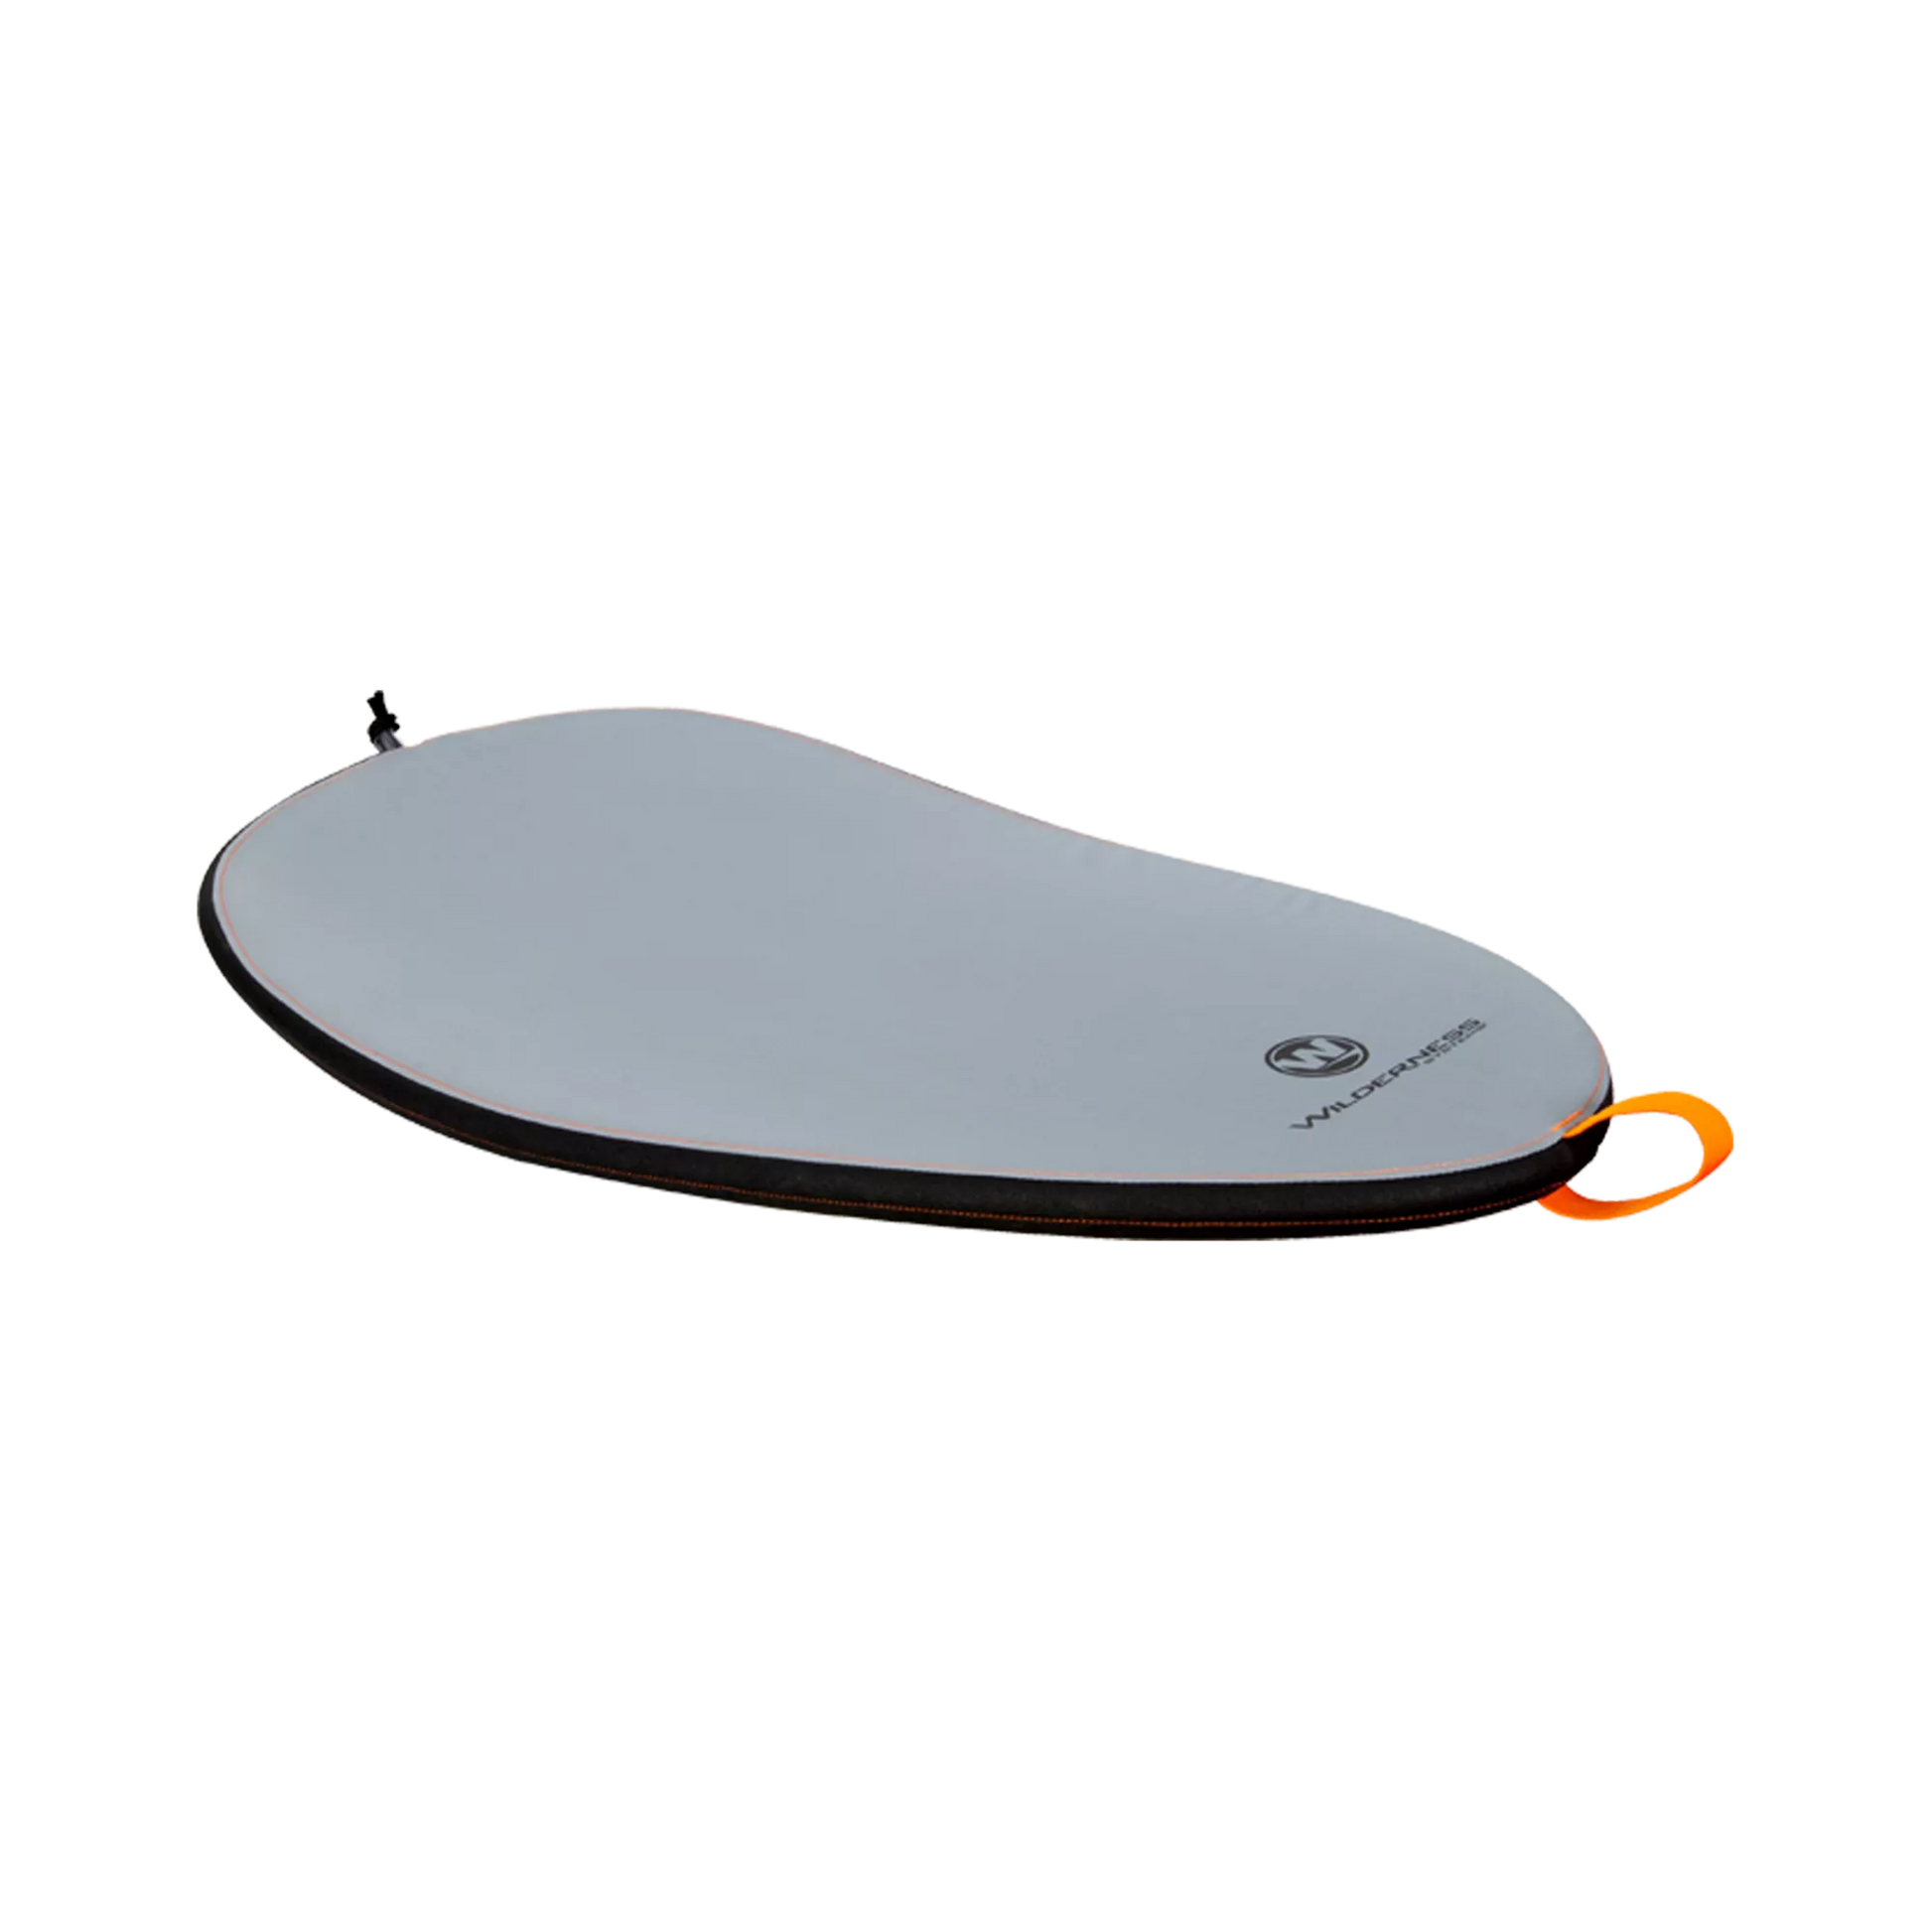 A grey and orange TrueFit Cockpit Cover - Wilderness Systems kayak on a black background.